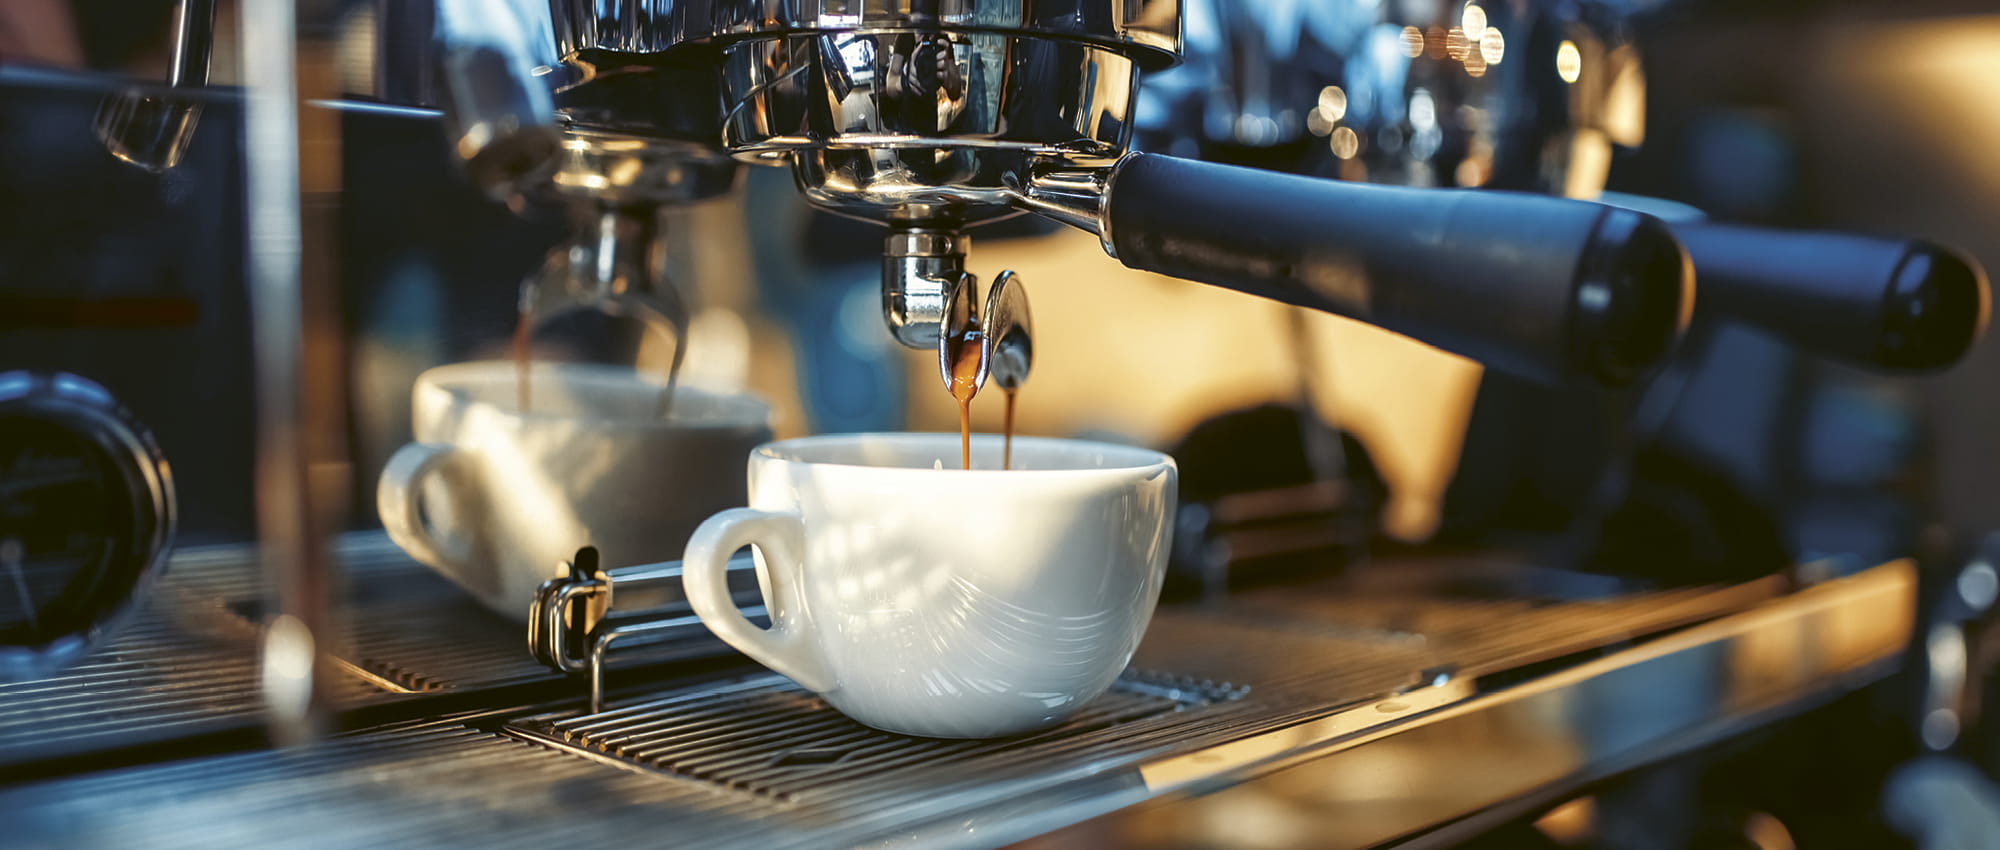 Coffee from a coffee machine drips into a cup. Copyright: Adobestock/Nomad_Soul